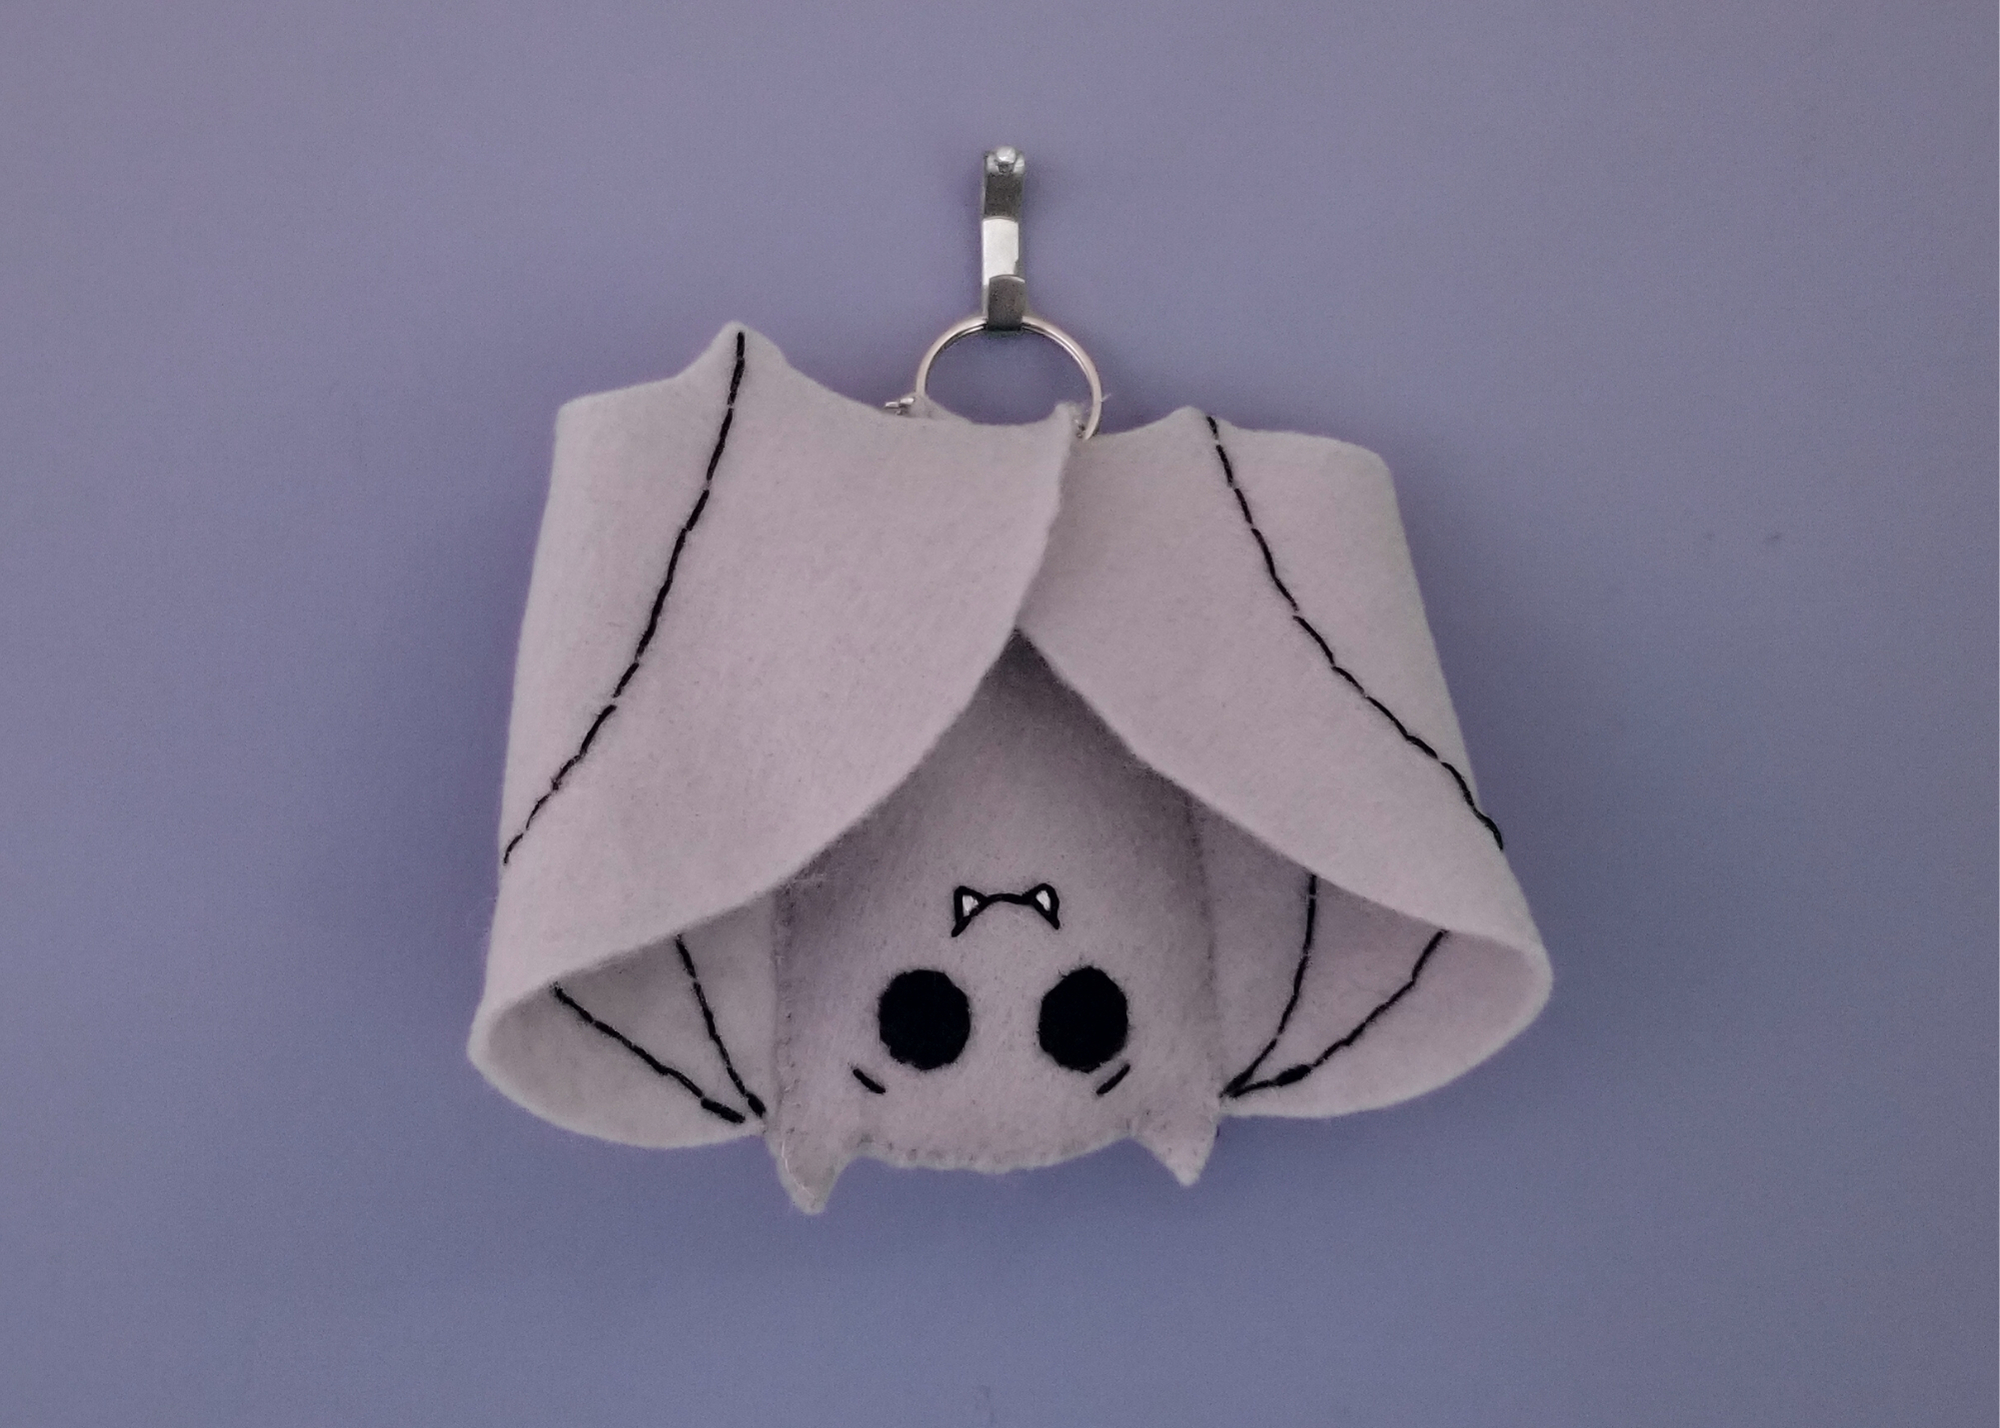 A gray felt bat plush with a little smiling face hanging upside down